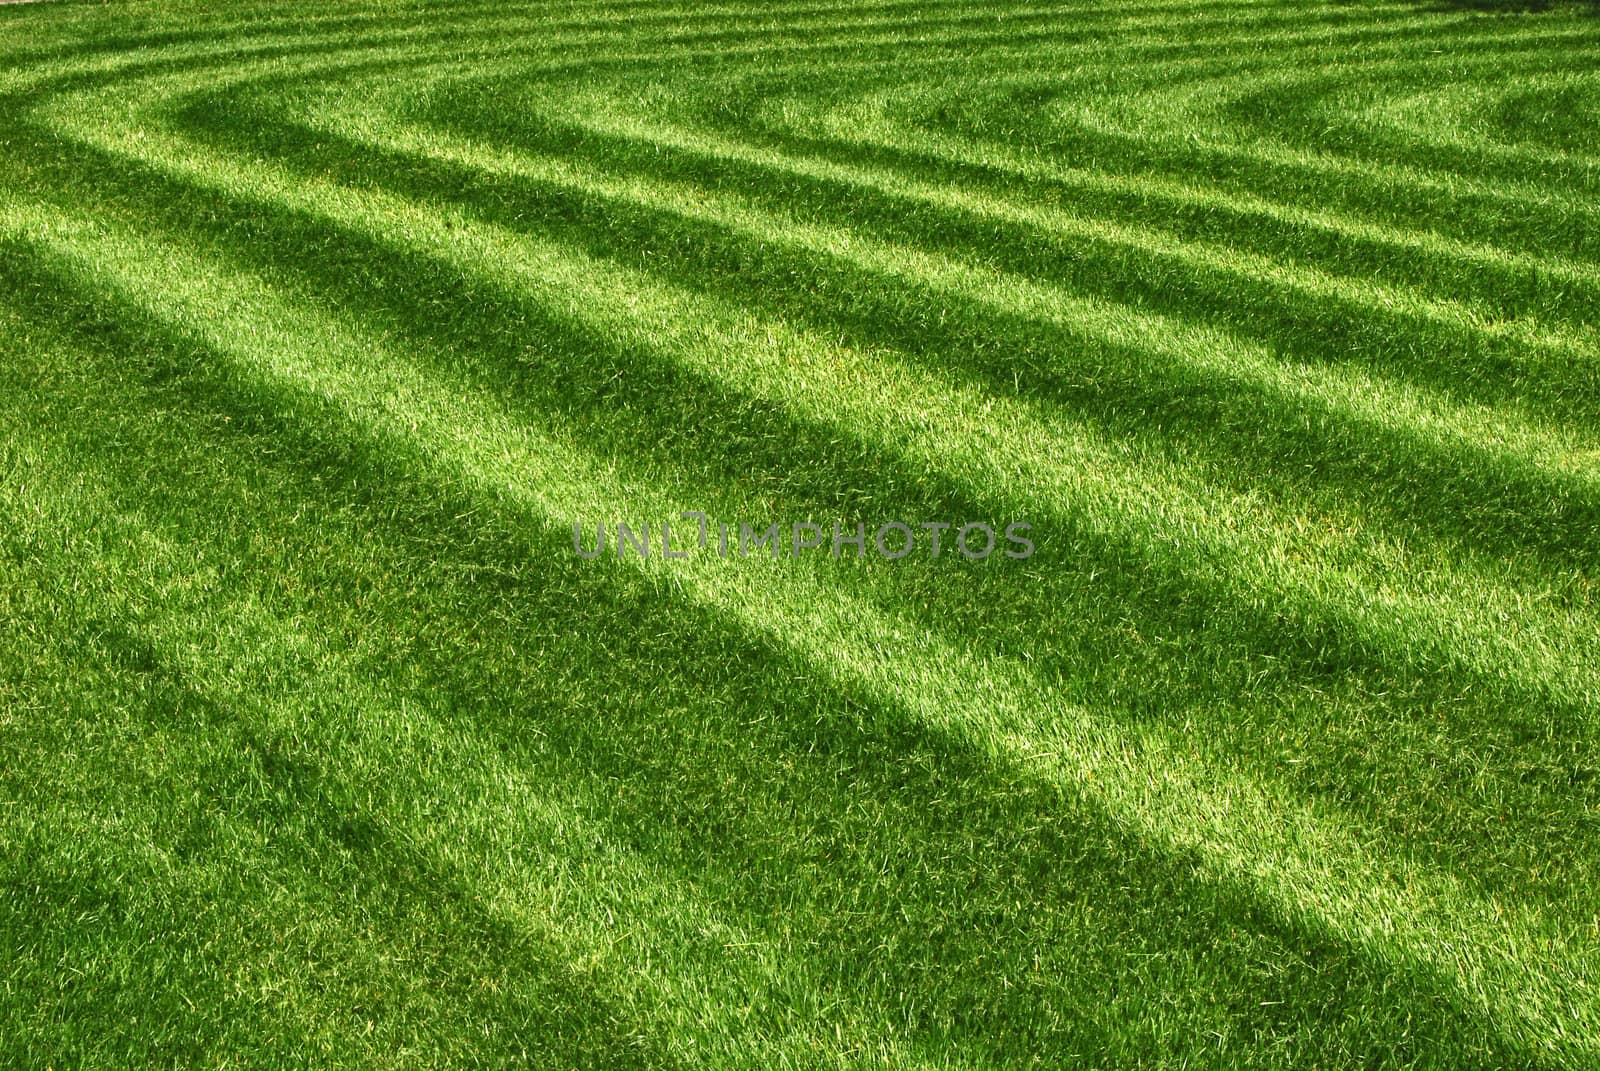 Parallel lines mowed grass in park as background